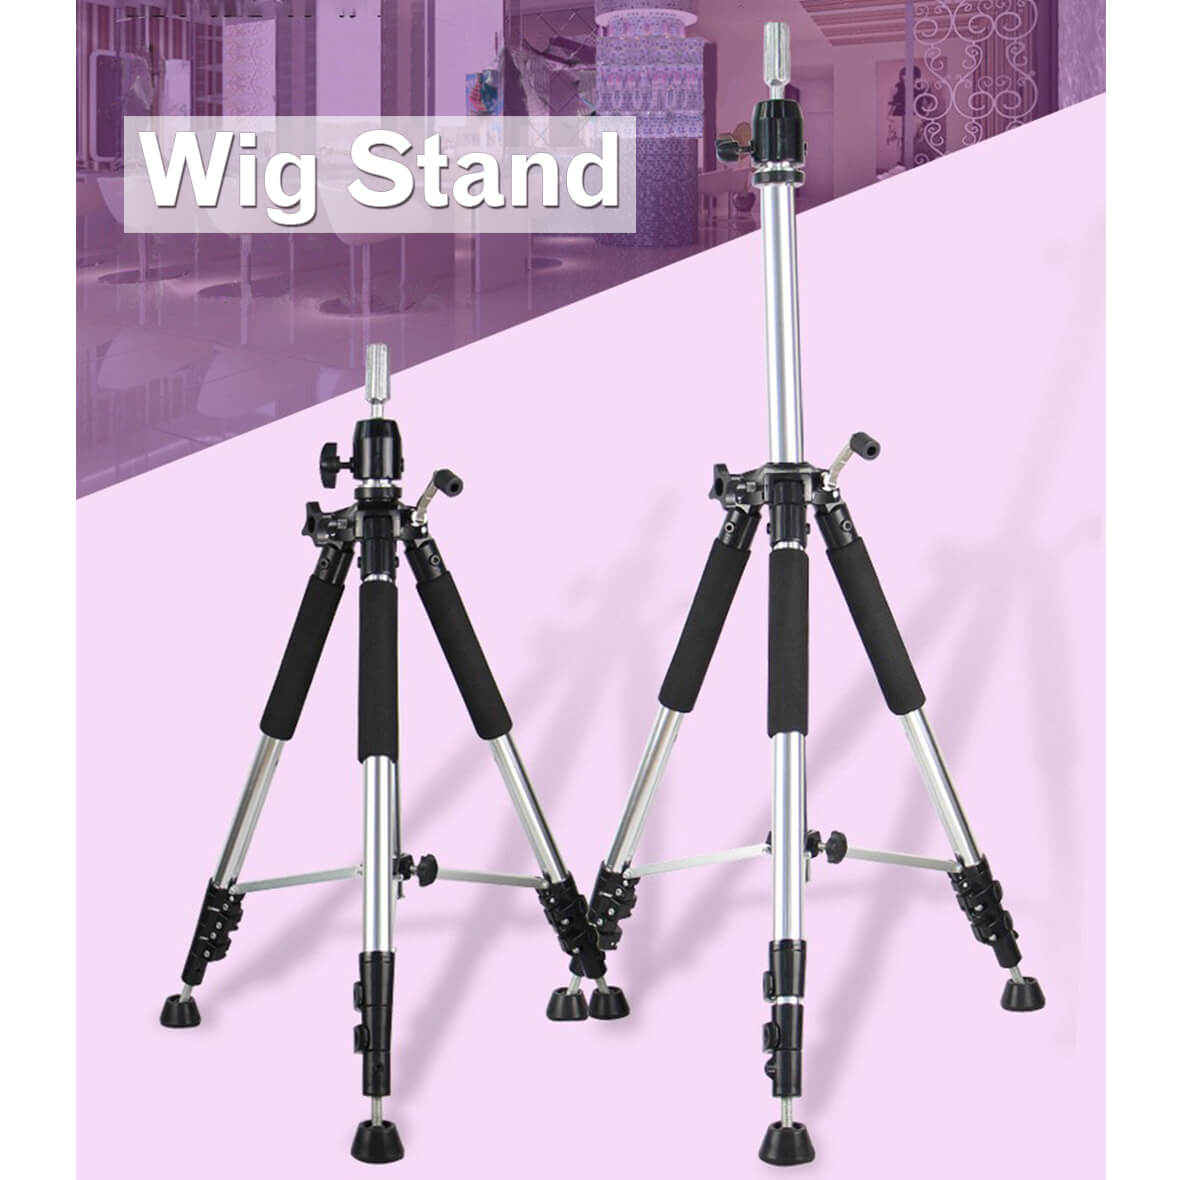 Wig Head Stands with Smartphone Clamp Mount